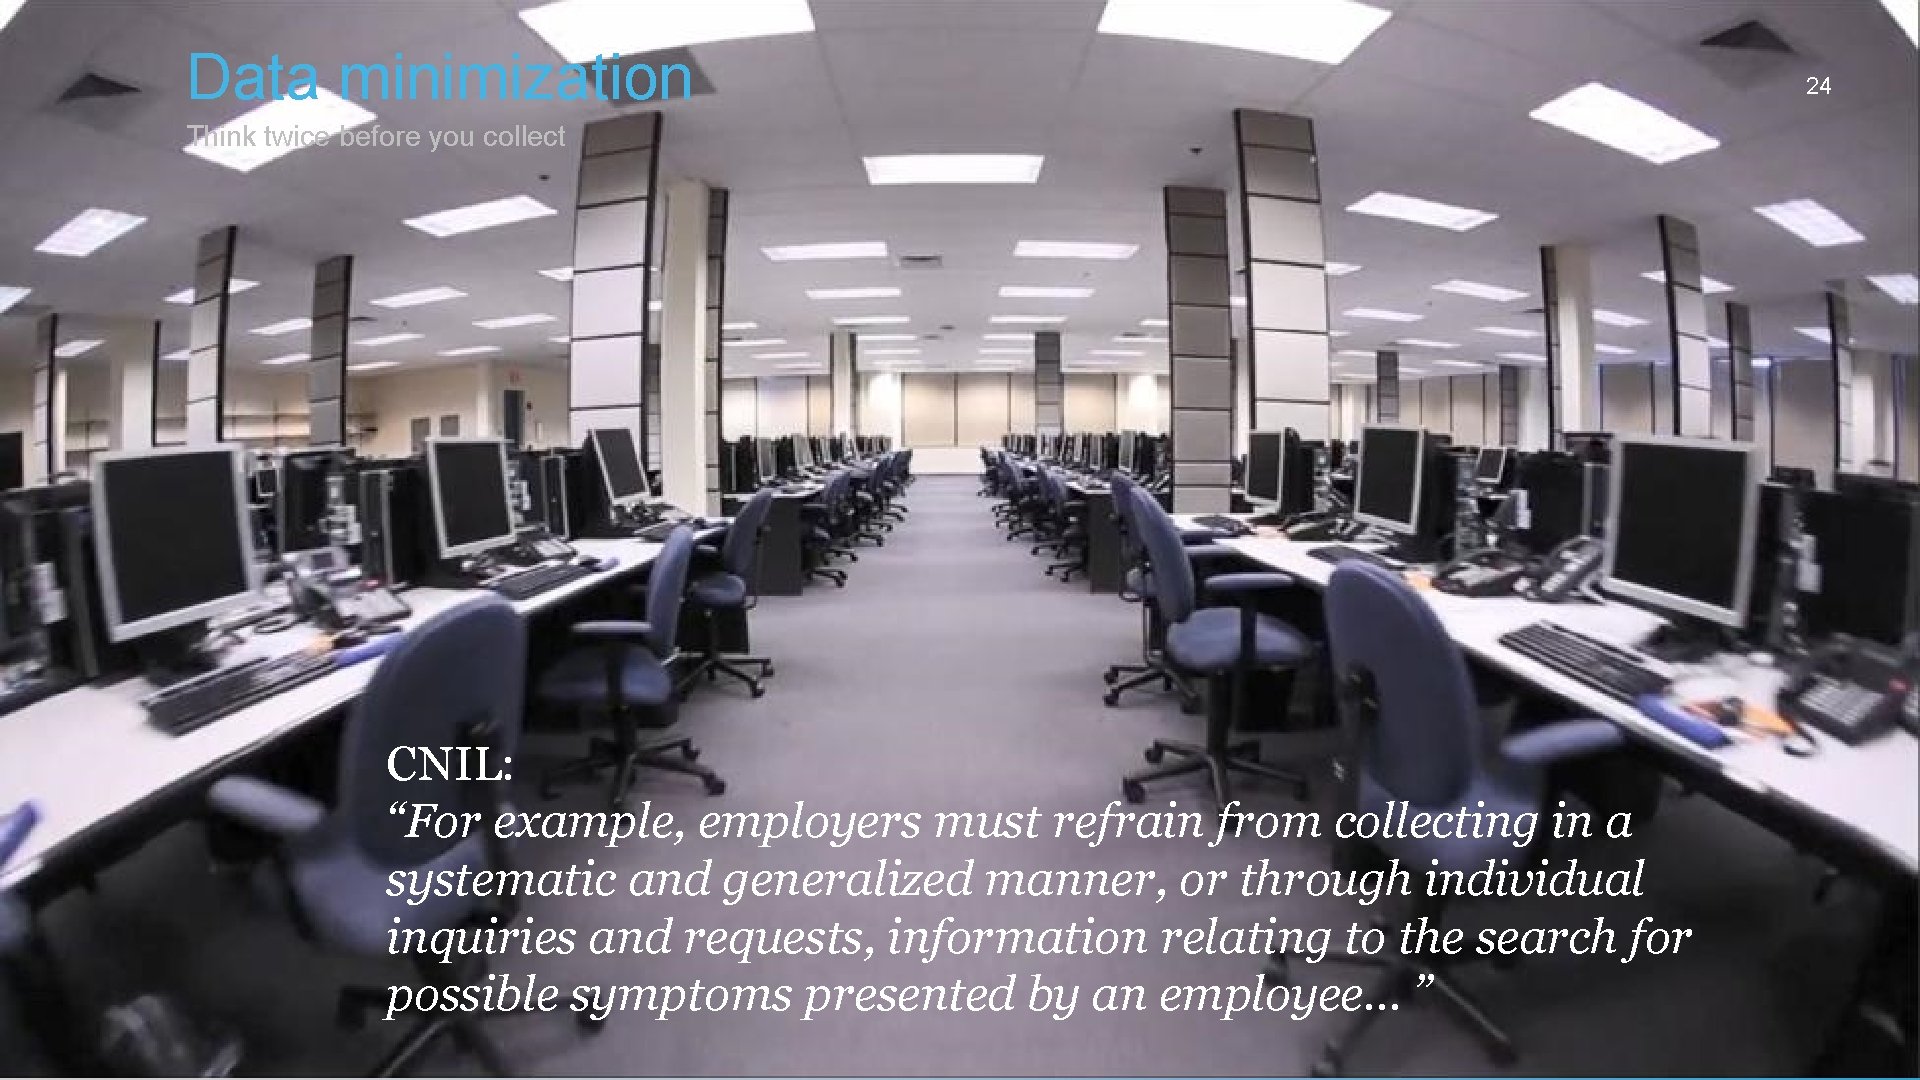 Data minimization Think twice before you collect CNIL: “For example, employers must refrain from